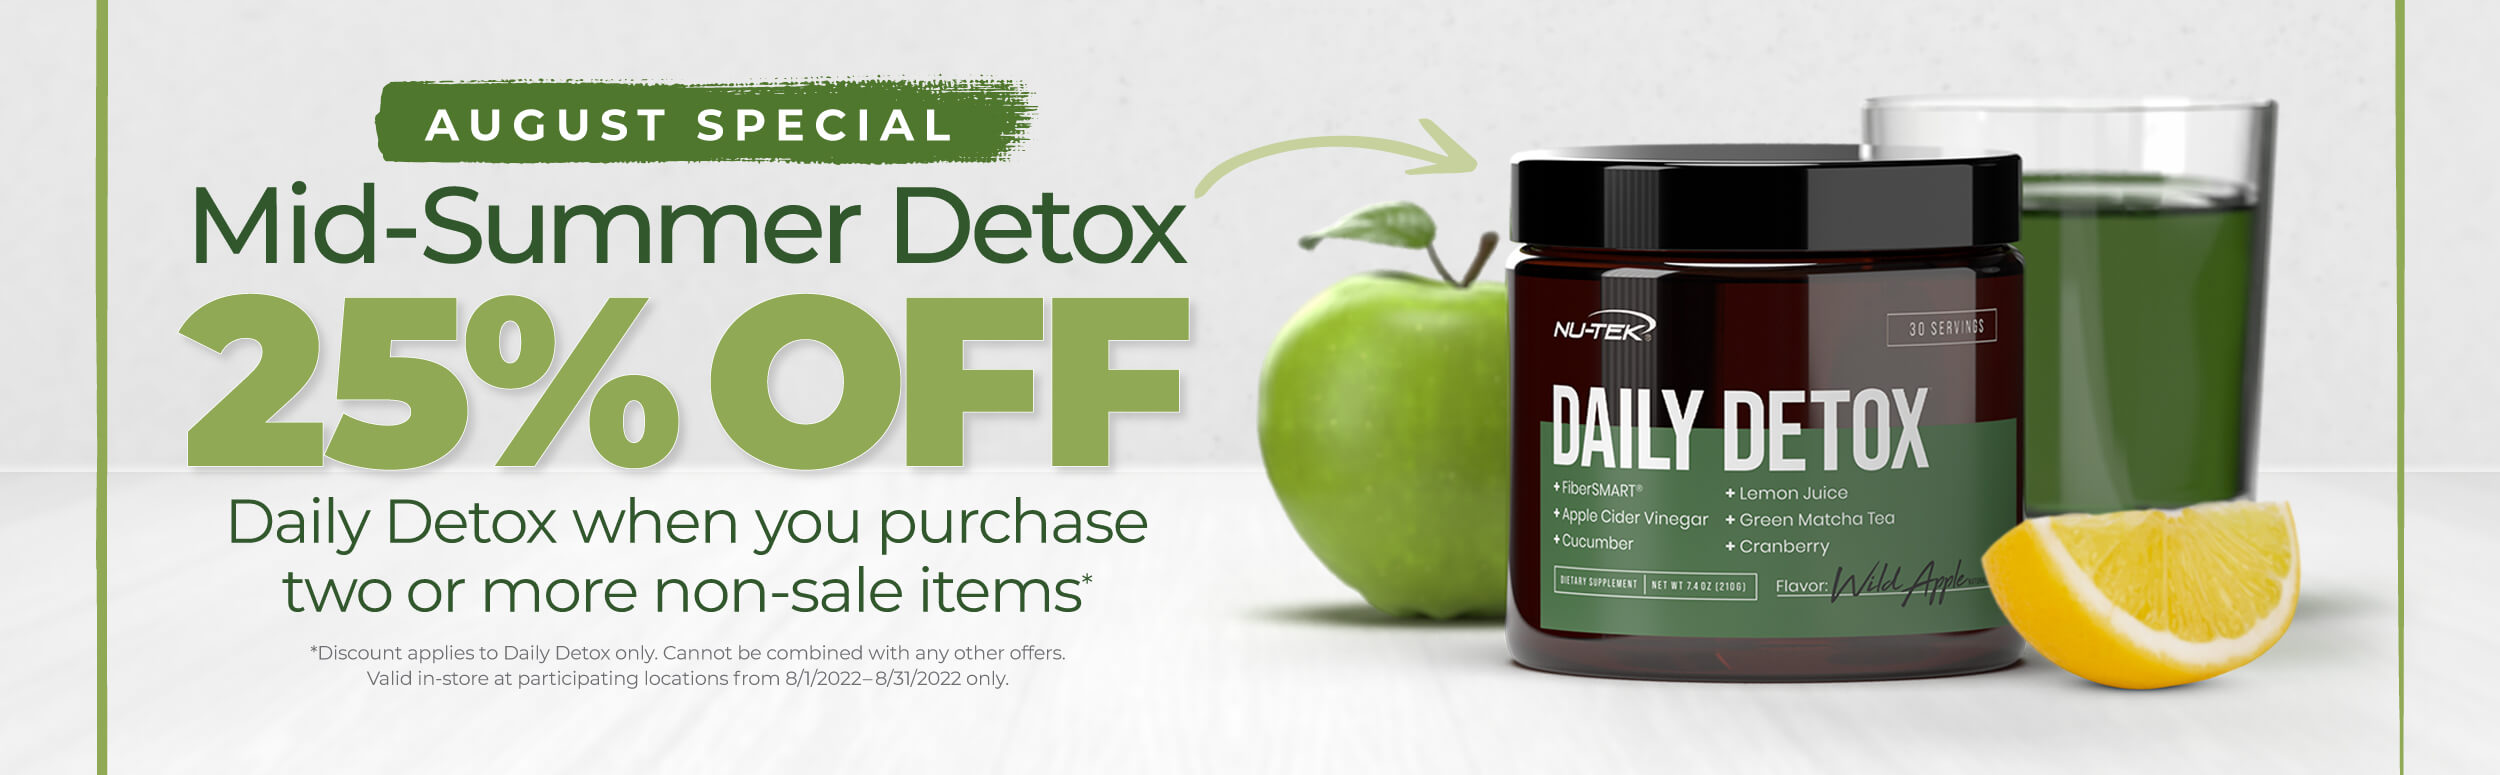 August special Mid-Summer Detox 25% off Daily Detox when you purchase two or more non-sale items